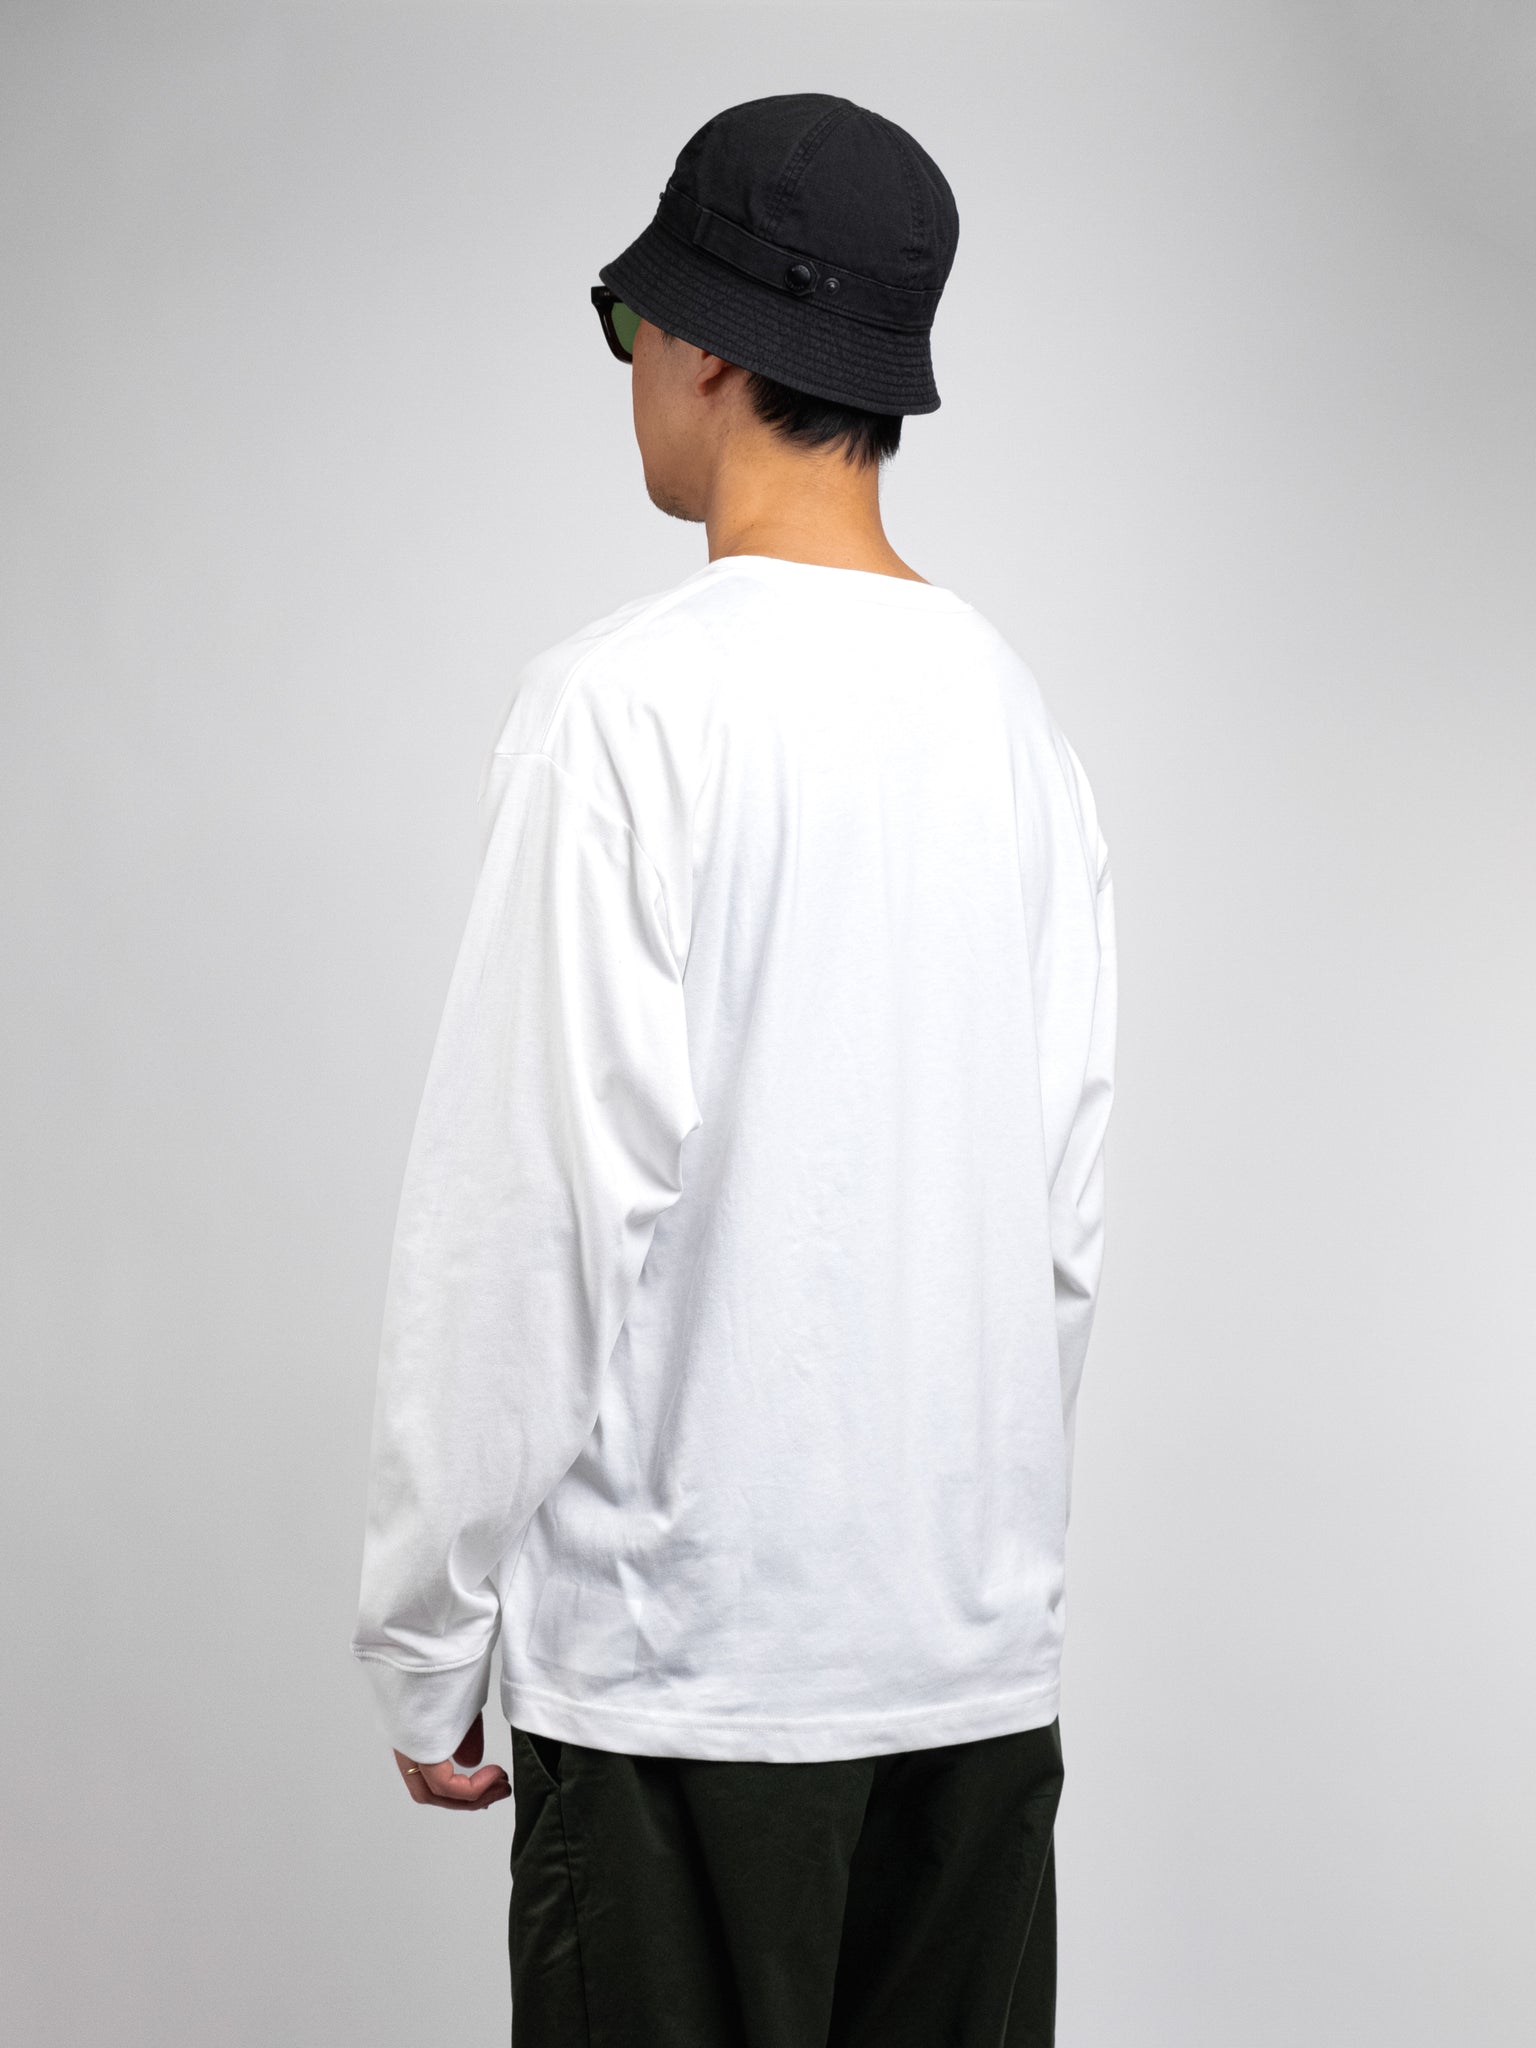 Relaxed Fit Long Sleeve White - v2